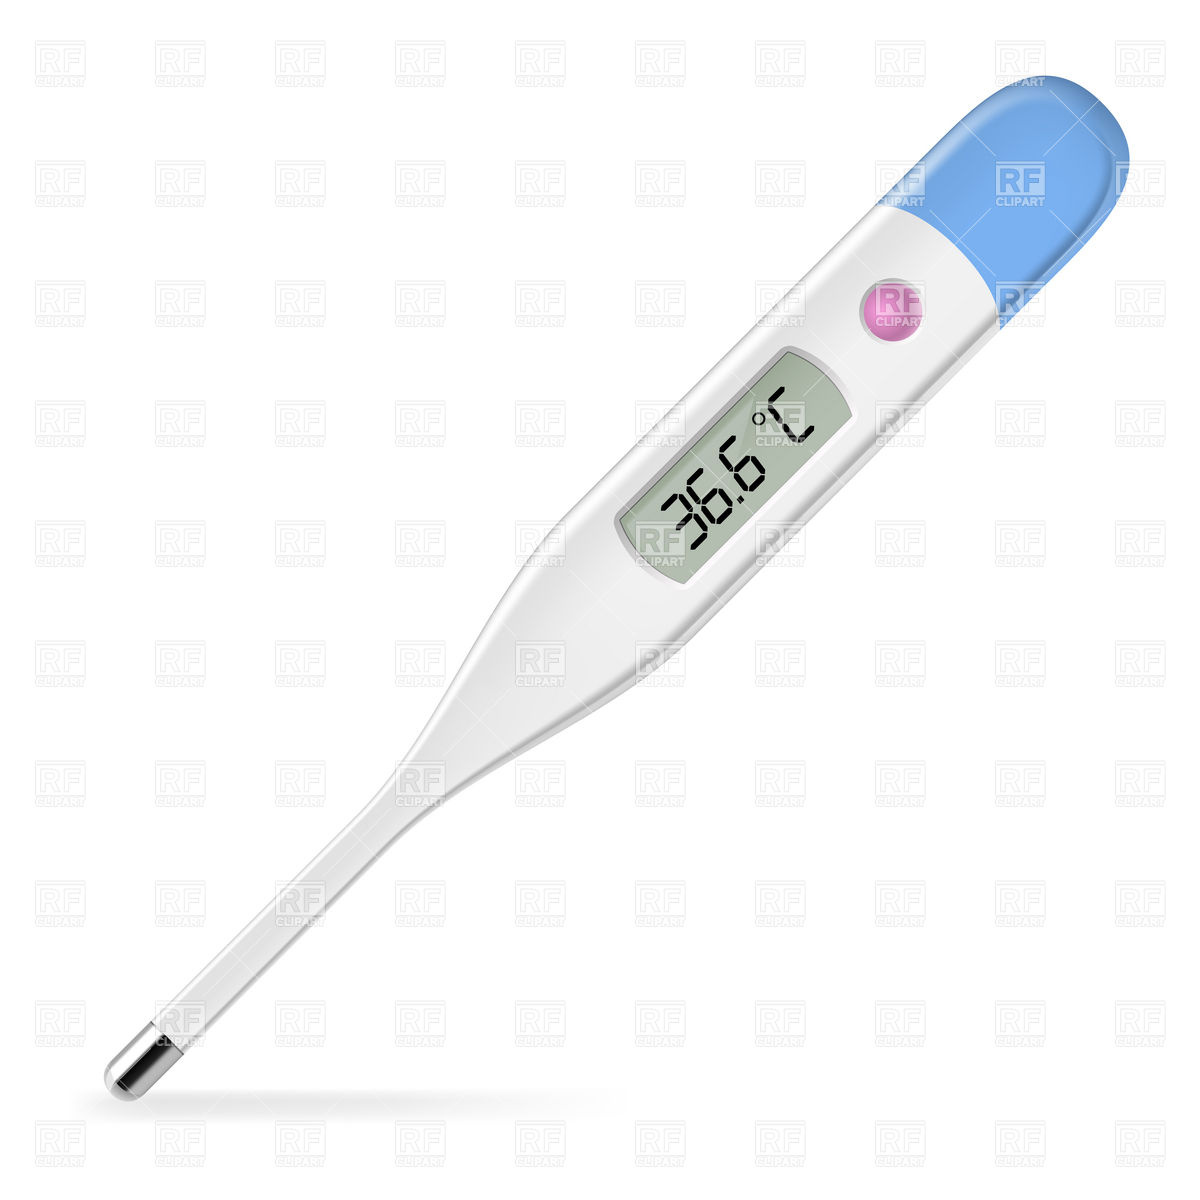 Modern Electronic Thermometer Download Royalty Free Vector Clipart